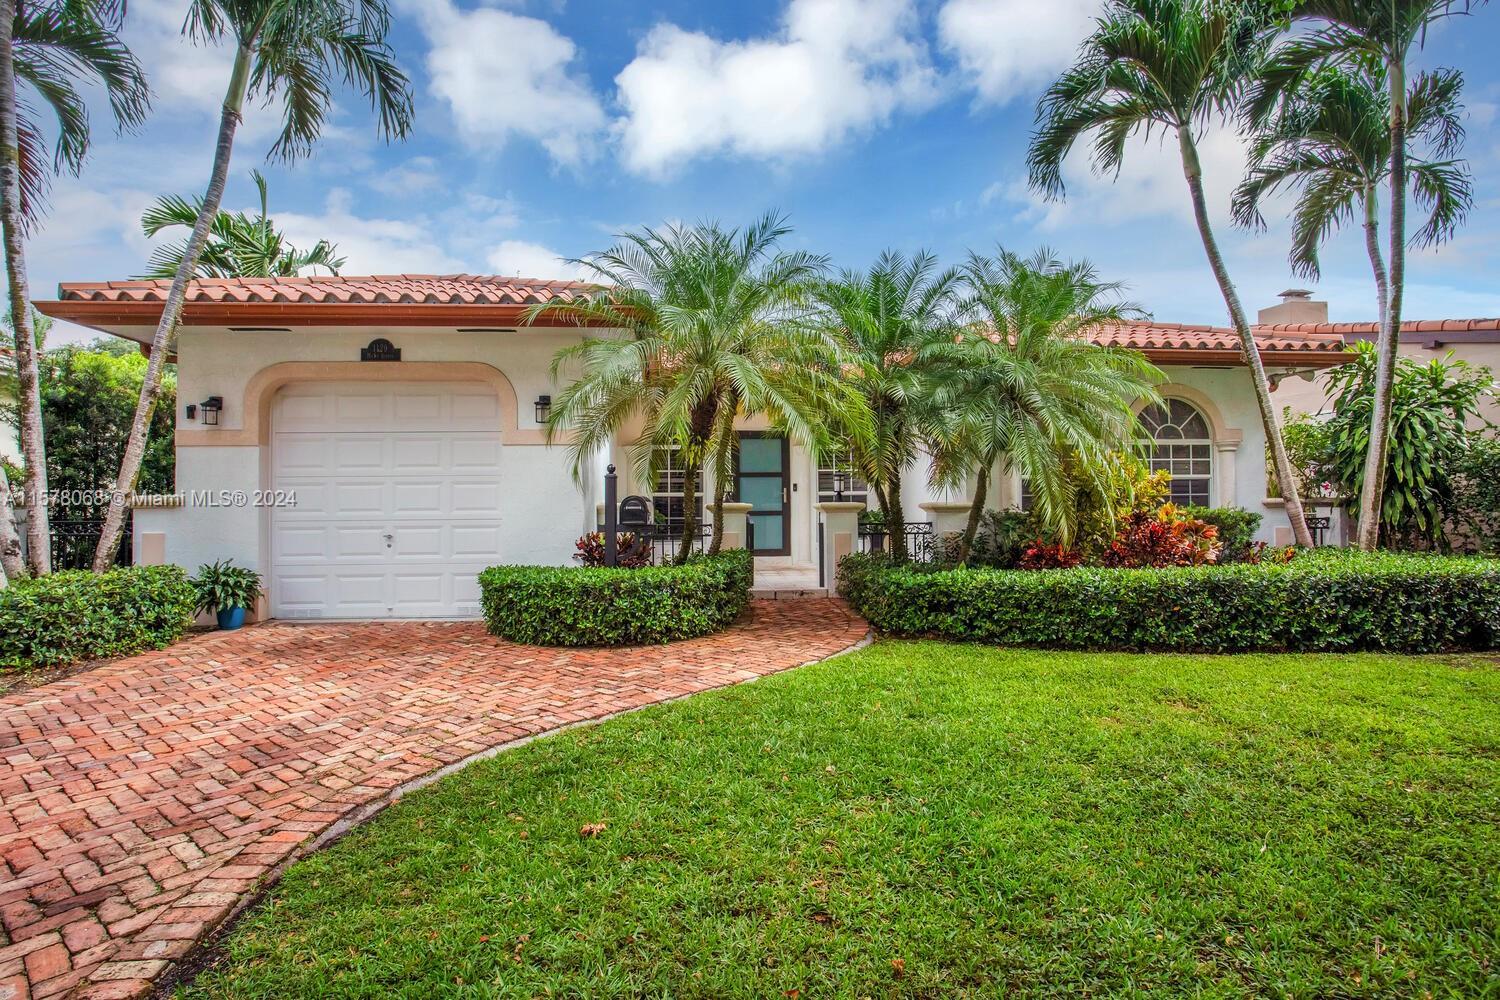 Photo of 1129 Milan Ave in Coral Gables, FL